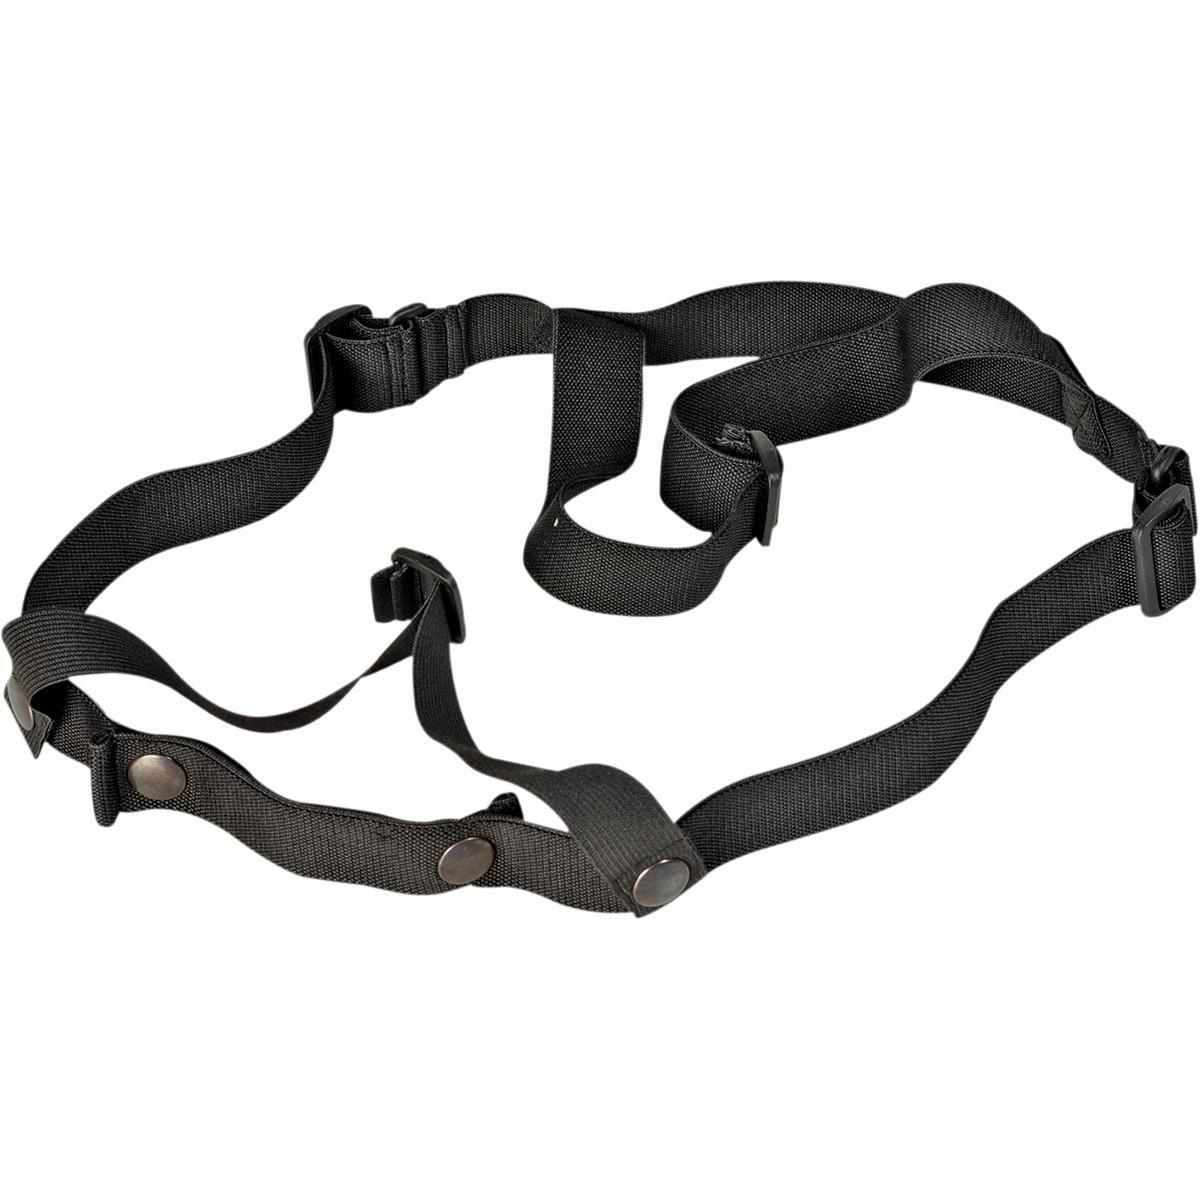 2GB7-ALPINESTARS-670-029 A-Strap Kit for Bionic Neck Support